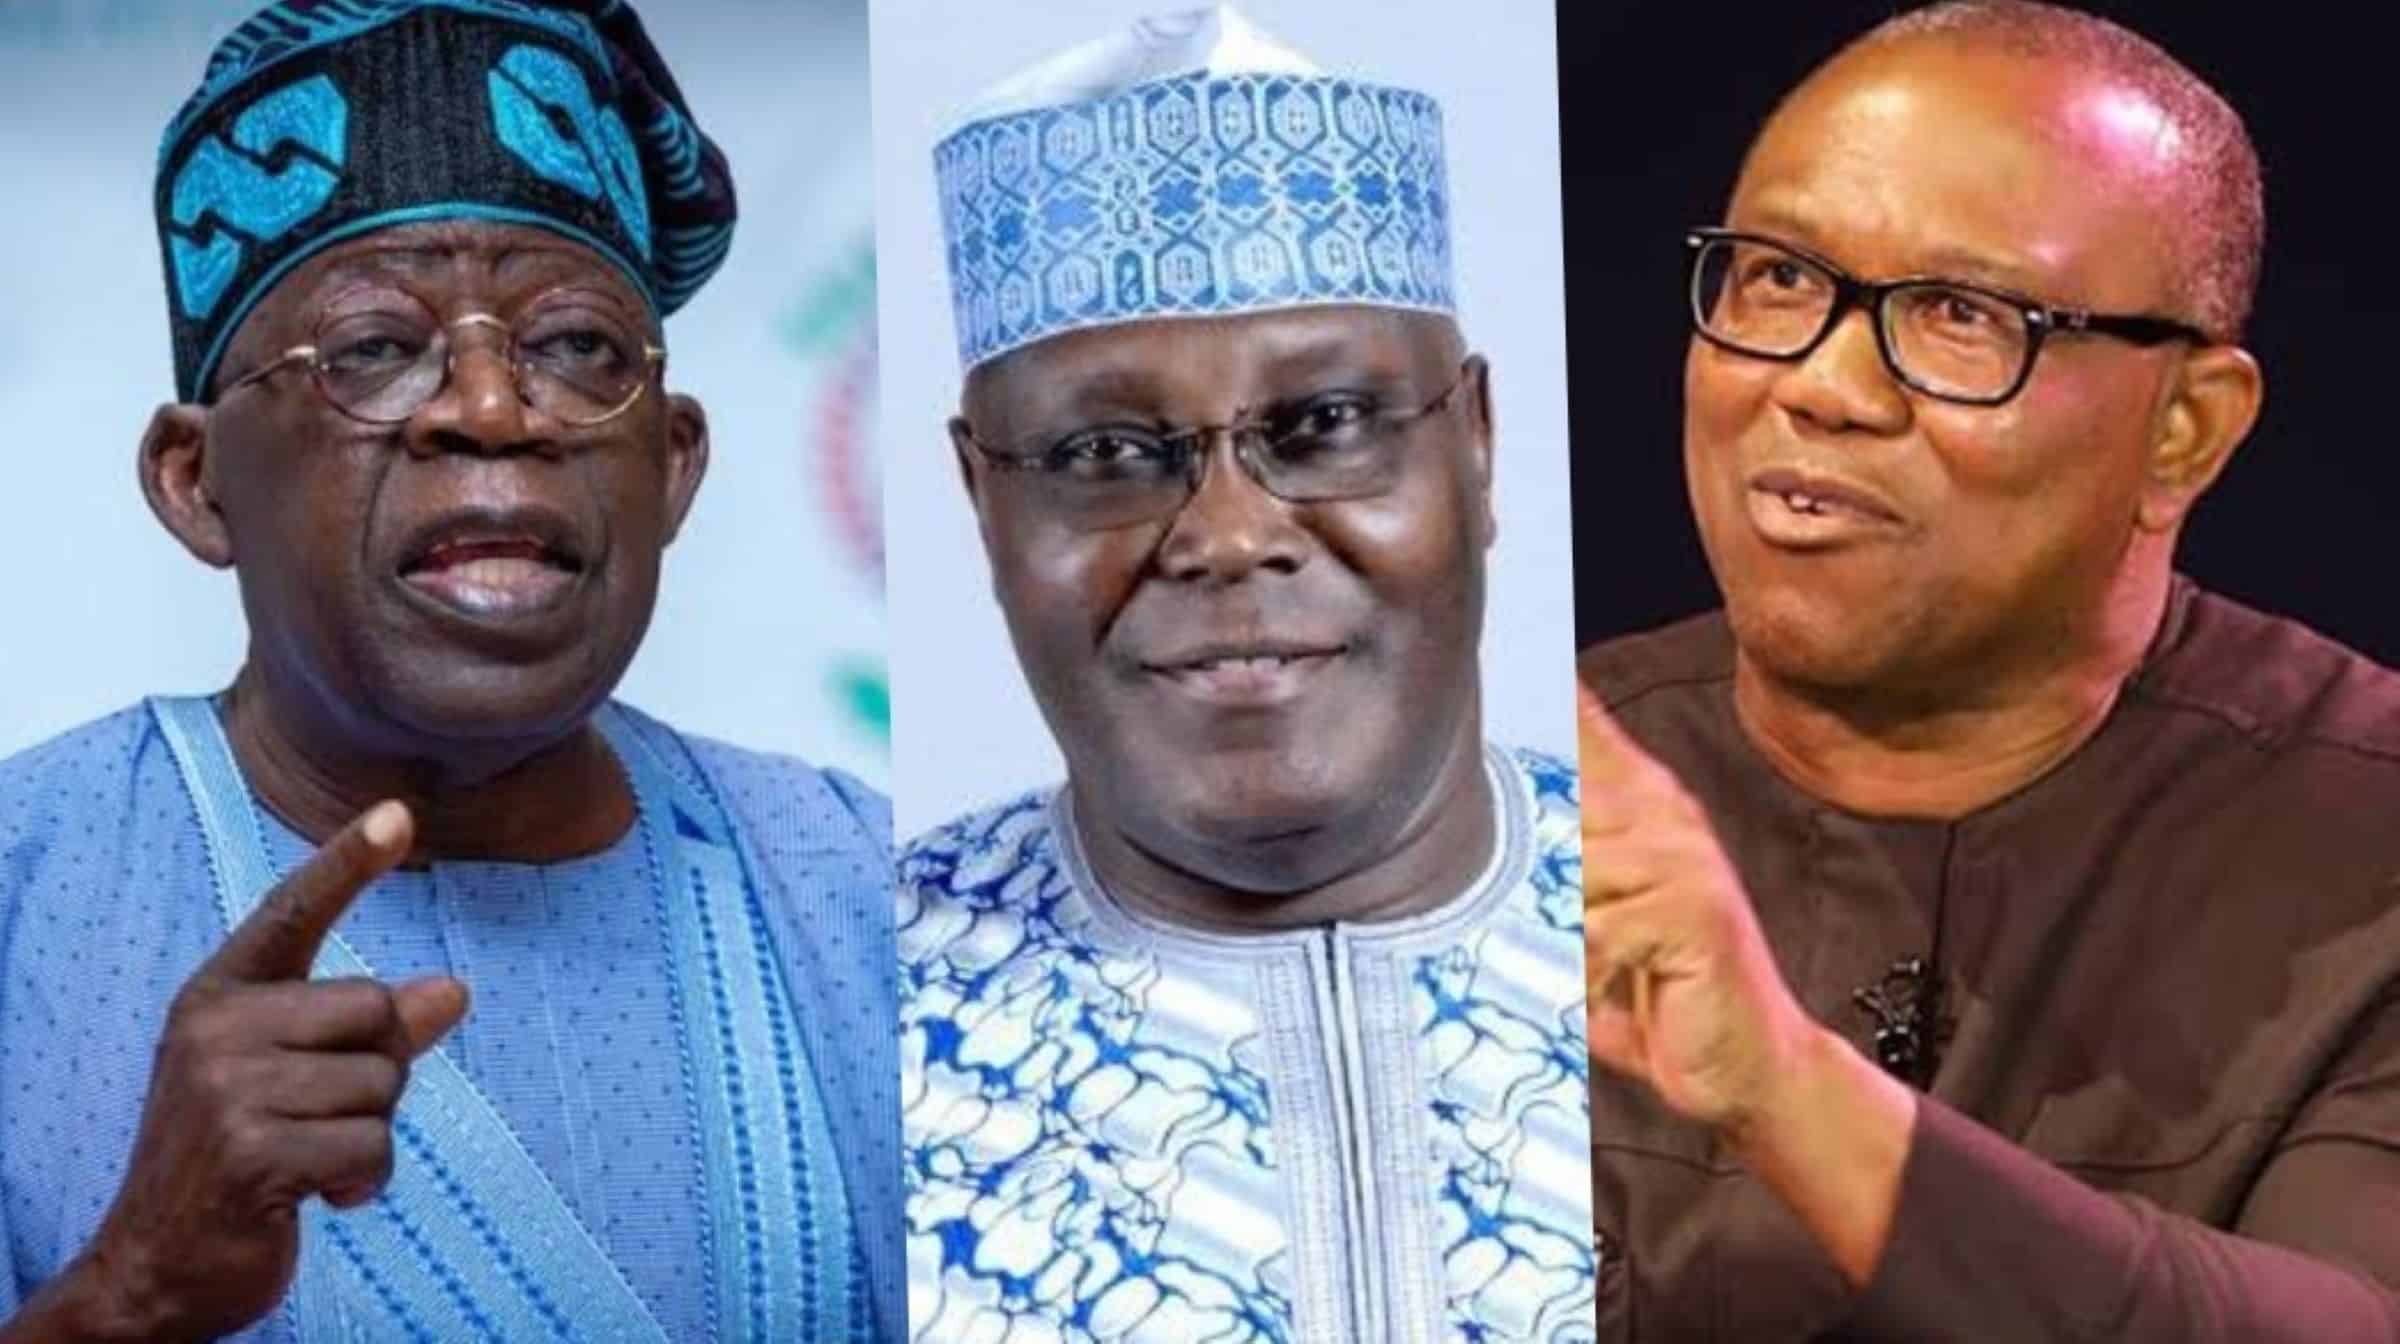 Use your money to pull Nigerians out of poverty and unemployment - APC group tells Obi and Atiku